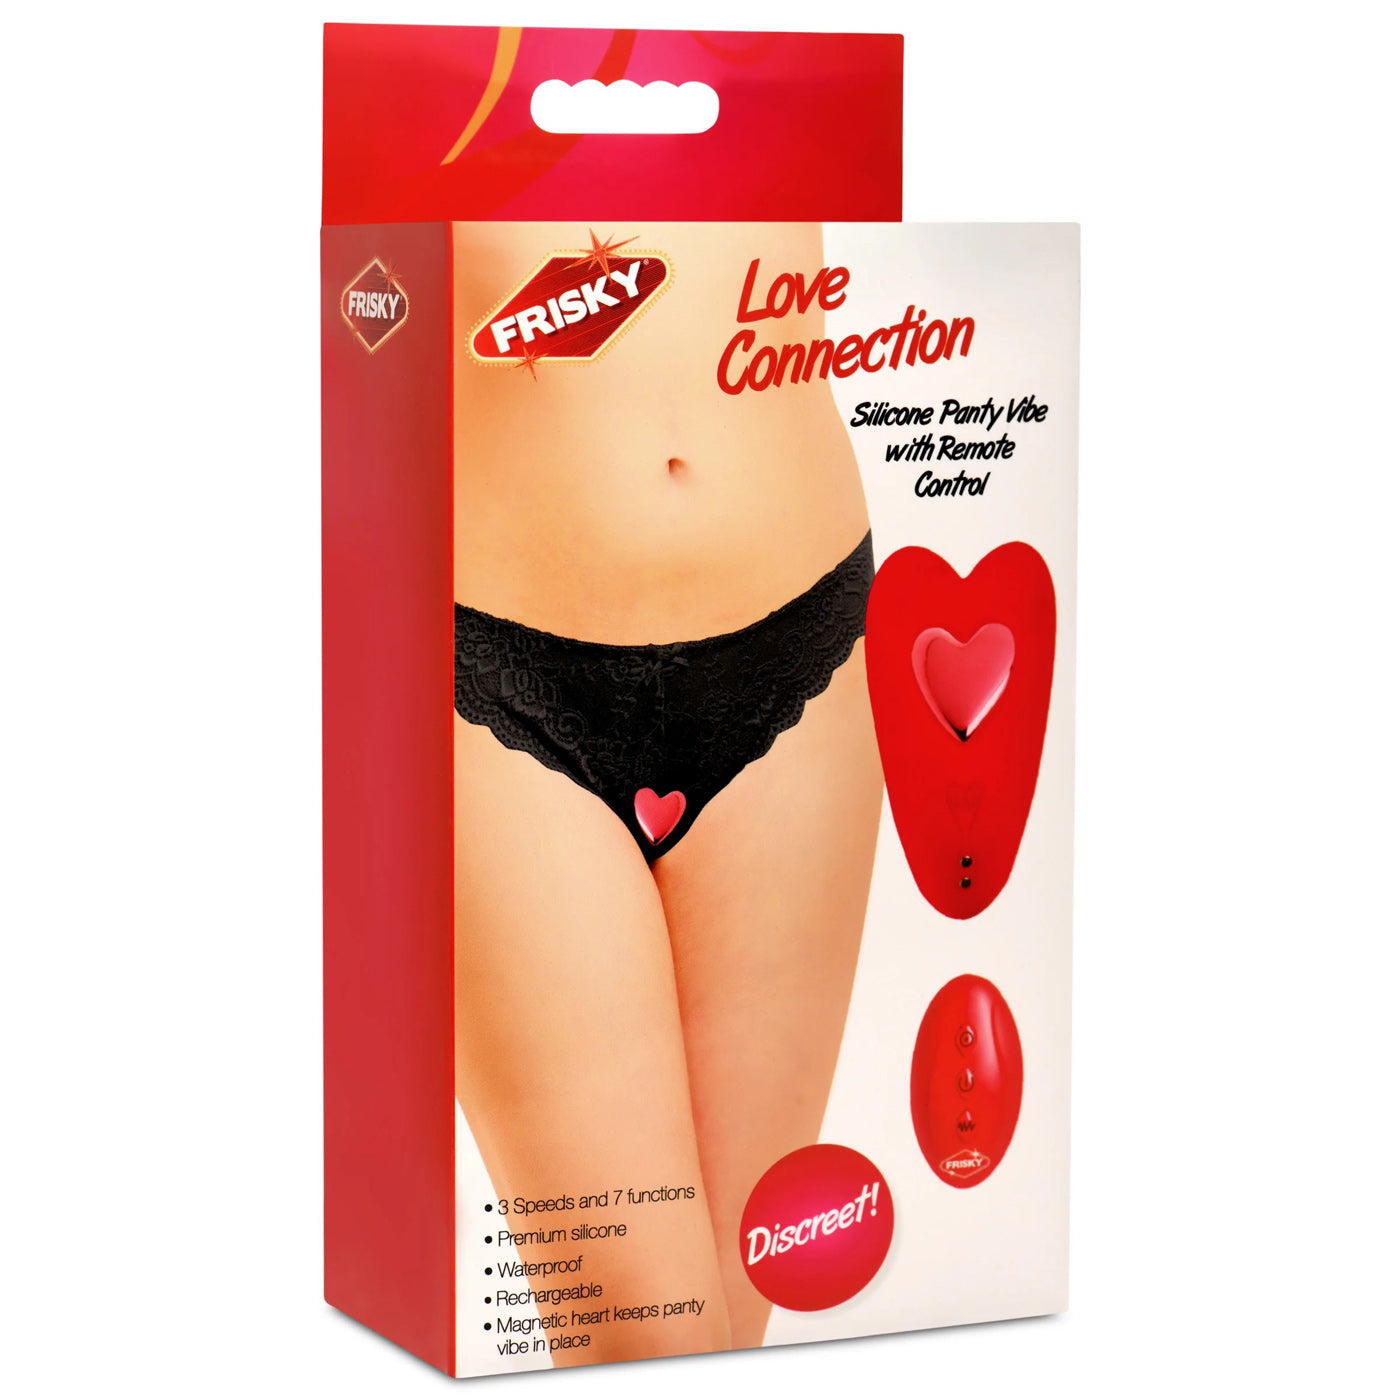 Love Connection Silicone Panty Vibe With Remote Control - Red-1